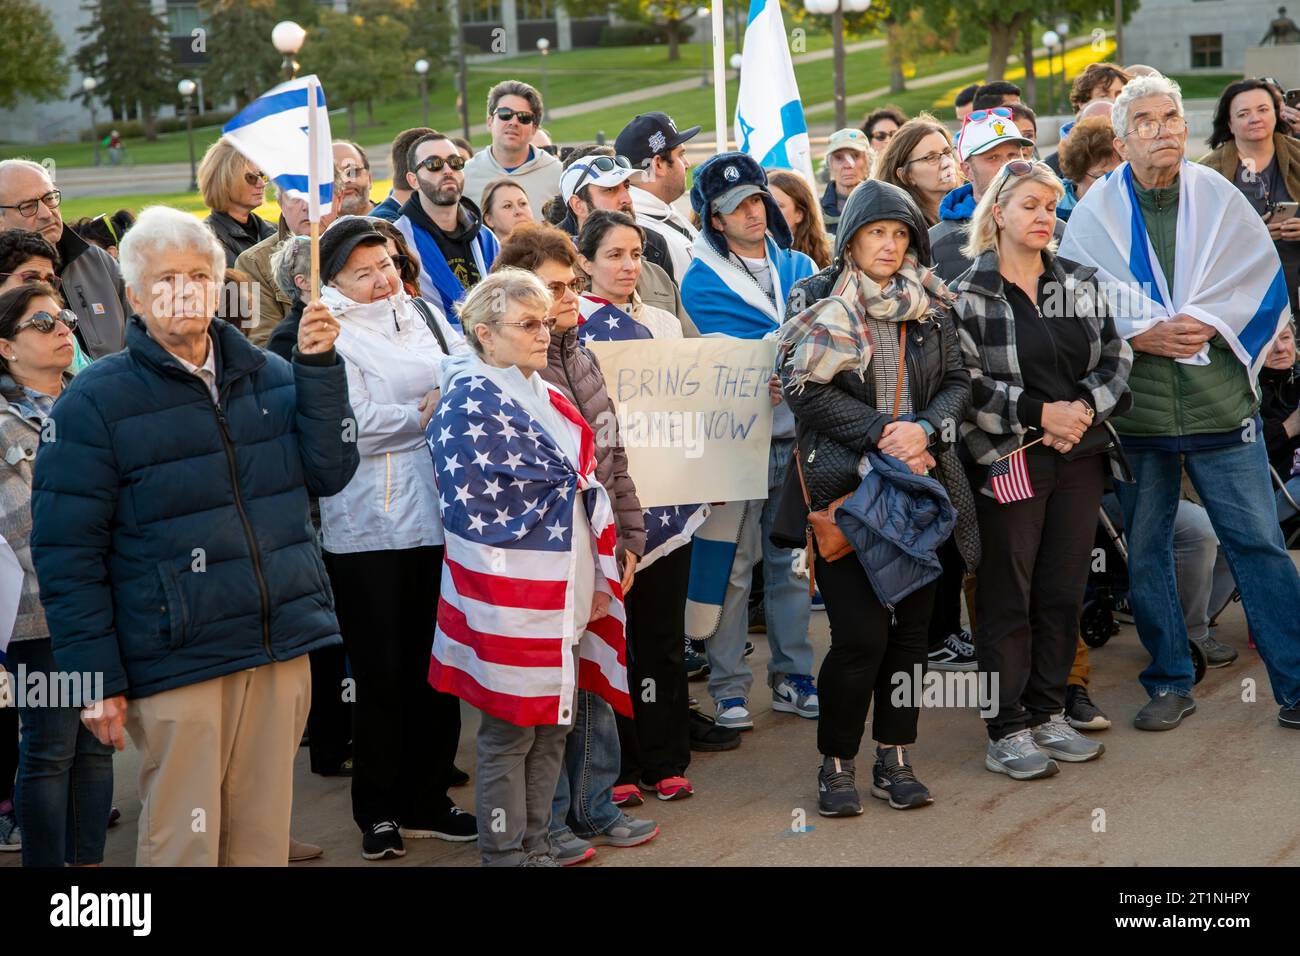 St. Paul, Minnesota. People of all ages gather at the state capitol to show support for Israel and calling for the end of terrorism. Stock Photo